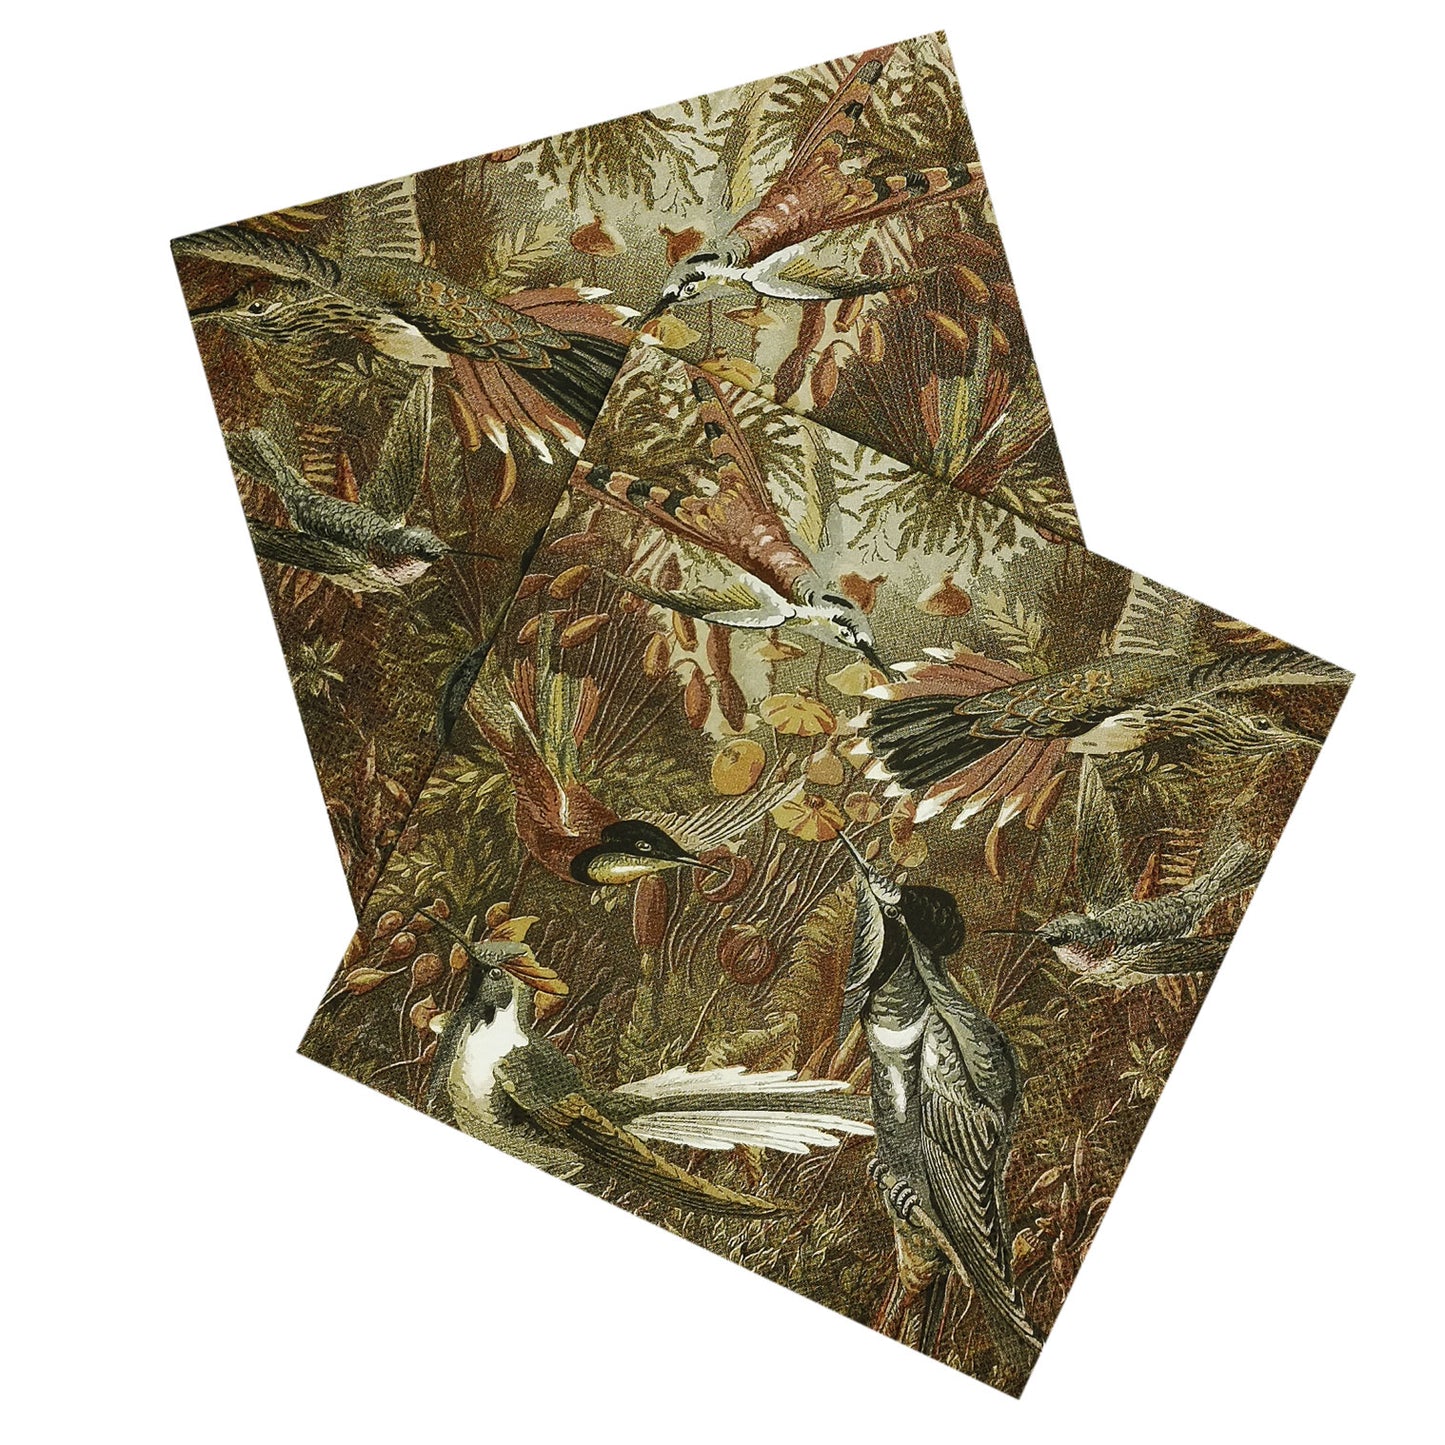 Hummingbirds in the Grass Paper Luncheon Napkins - 20 Per Package